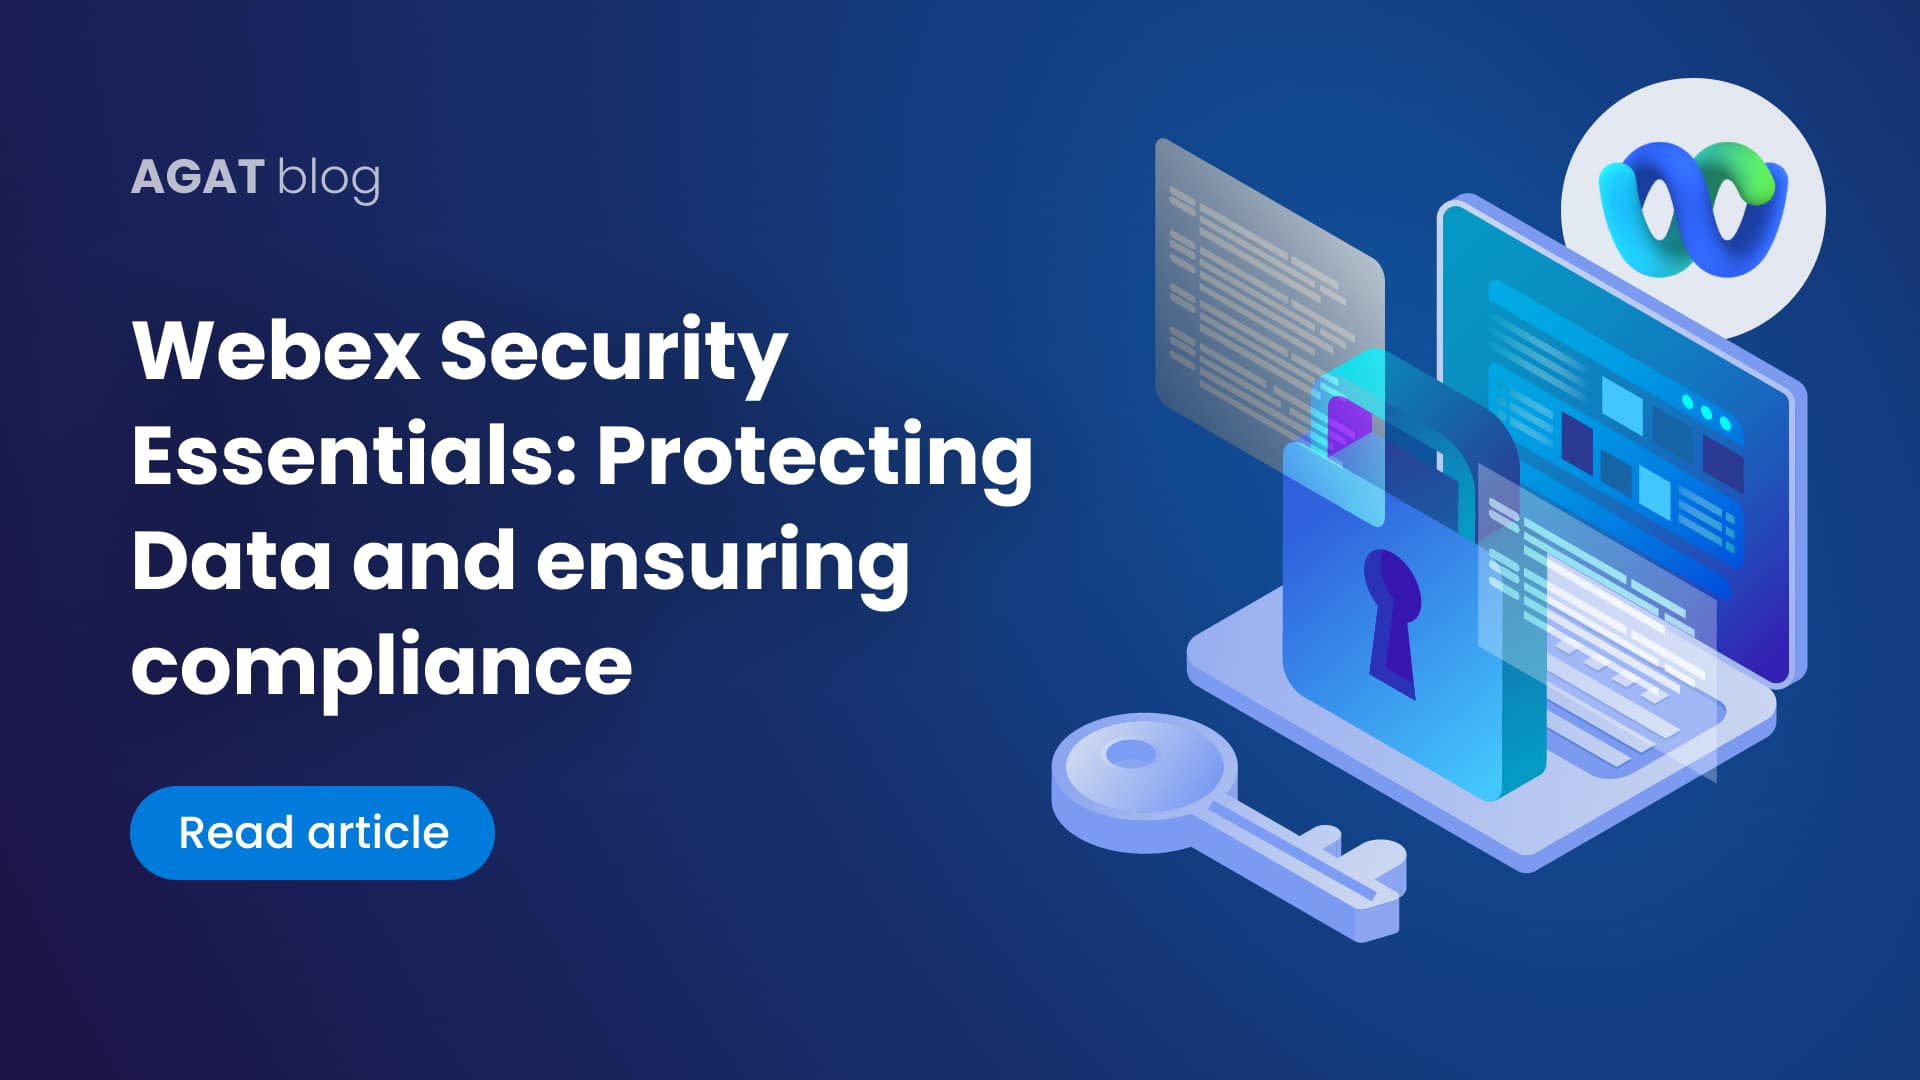 Webex Security Essentials: Protecting Data and Ensuring Compliance